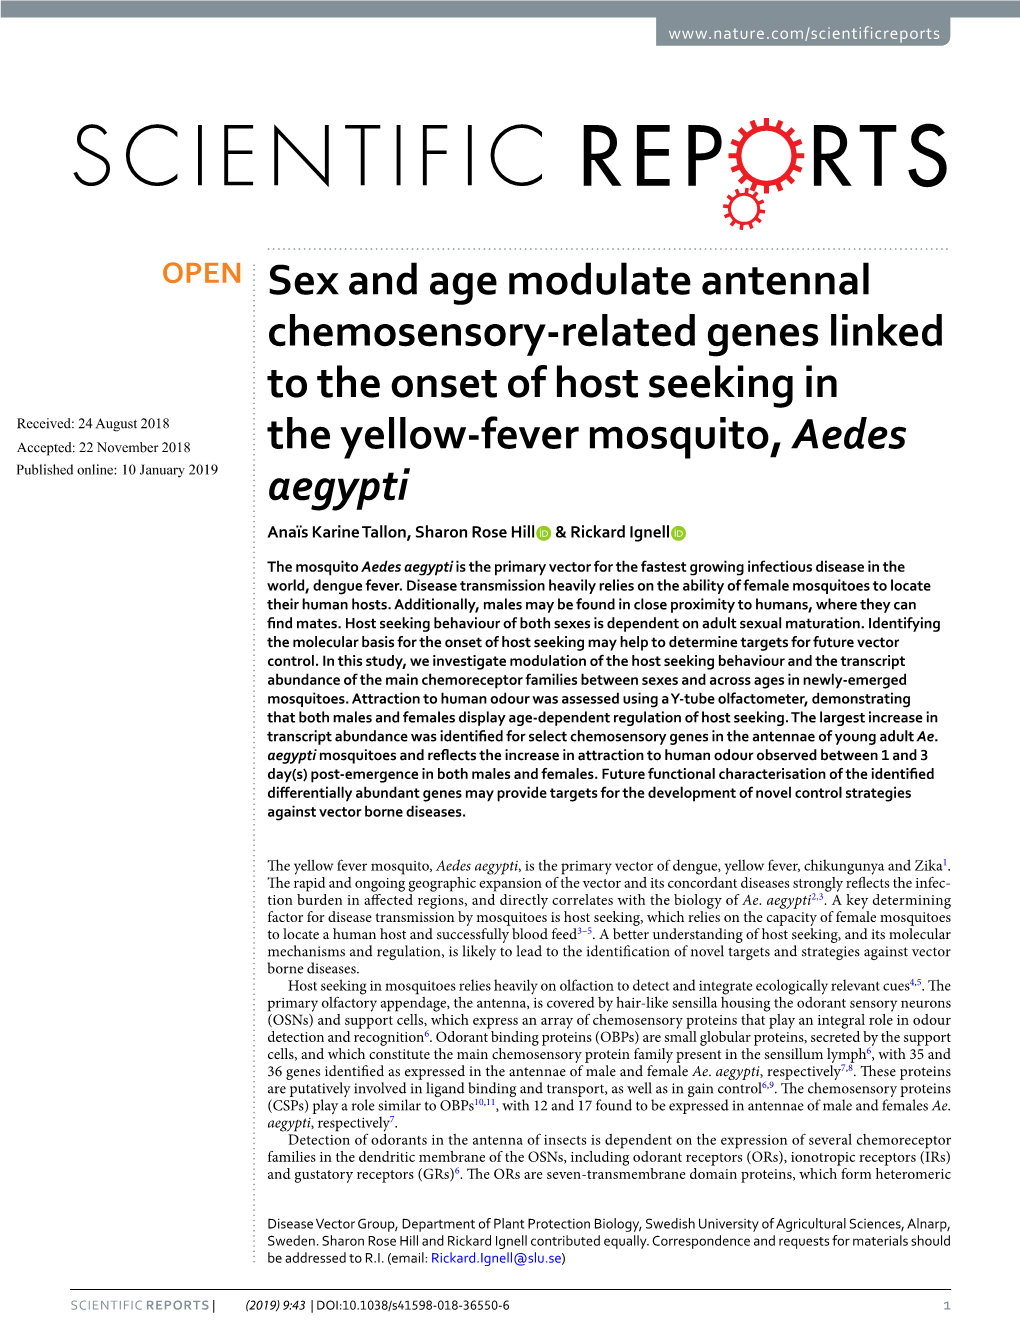 Sex and Age Modulate Antennal Chemosensory-Related Genes Linked